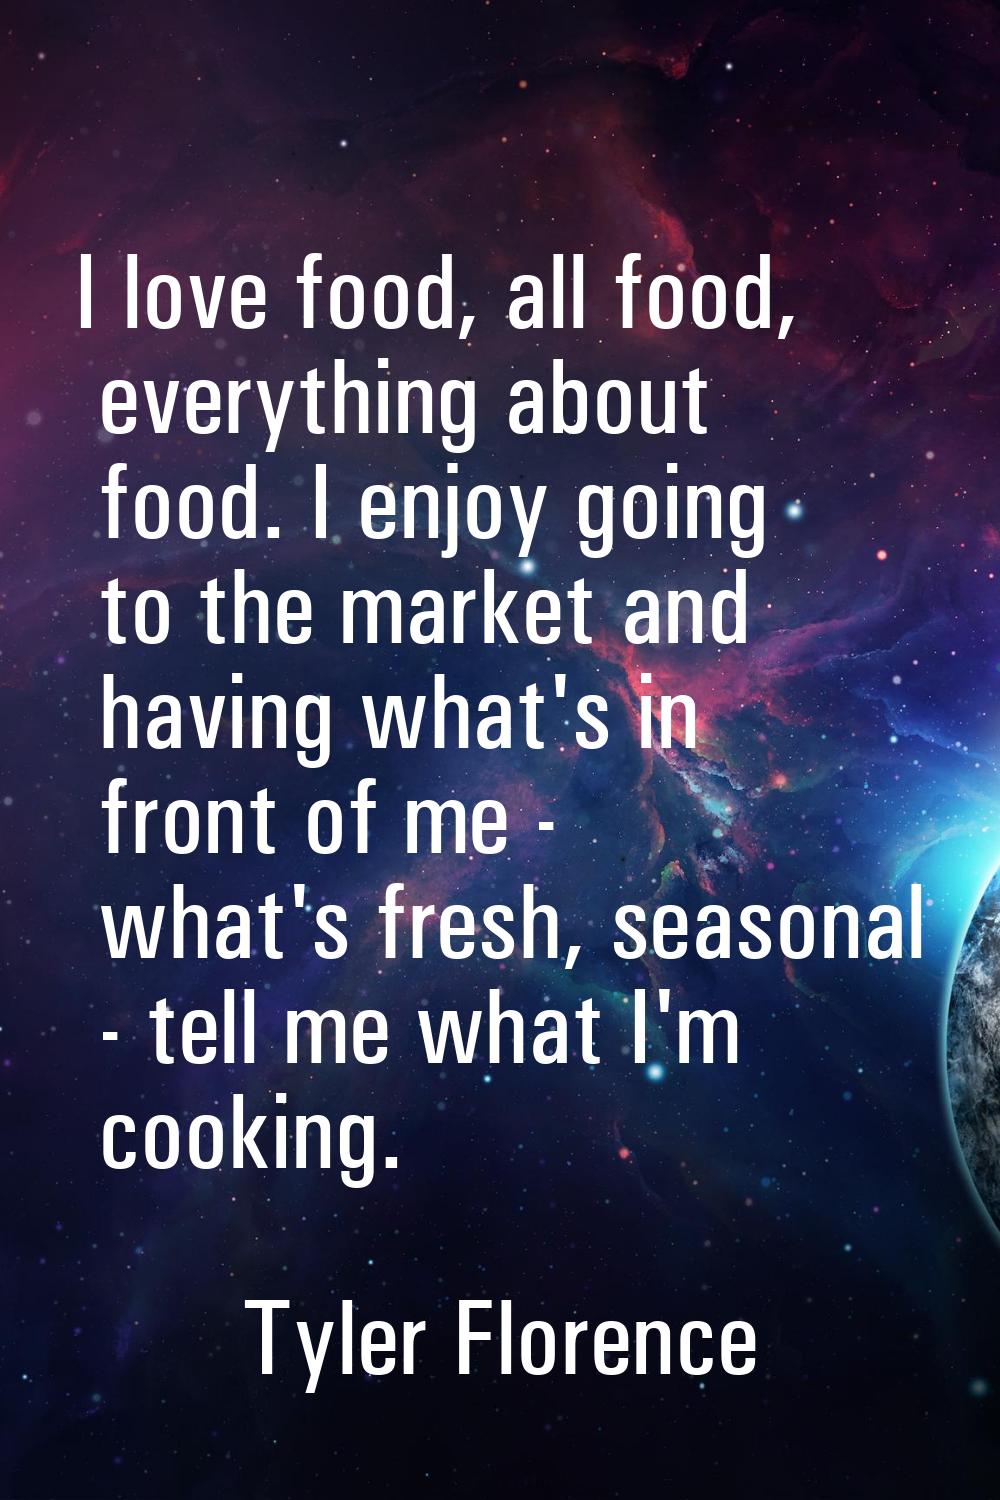 I love food, all food, everything about food. I enjoy going to the market and having what's in fron